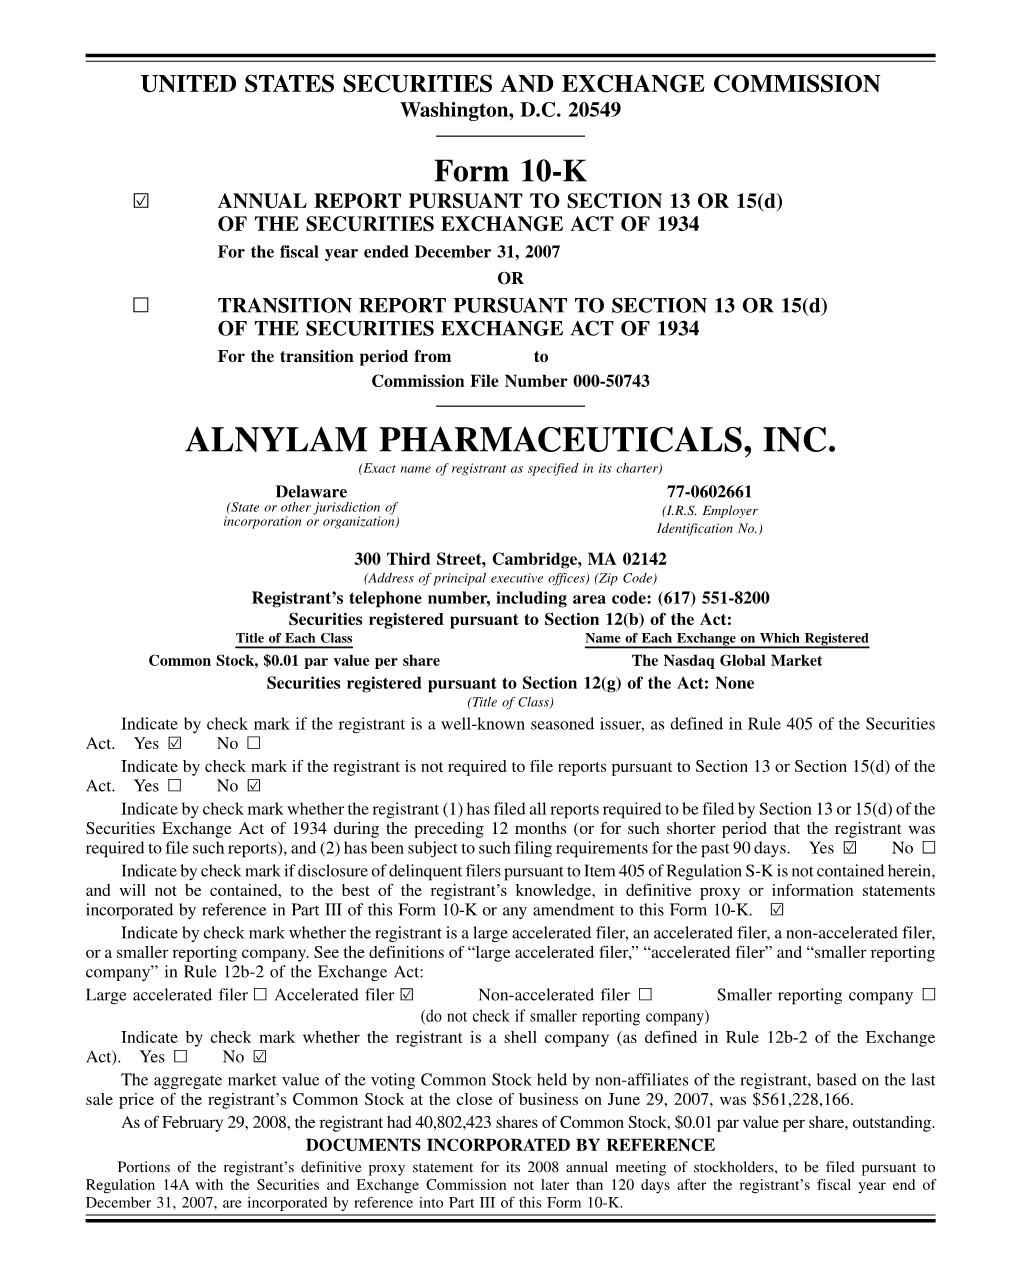 ALNYLAM PHARMACEUTICALS, INC. (Exact Name of Registrant As Specified in Its Charter) Delaware 77-0602661 (State Or Other Jurisdiction of (I.R.S